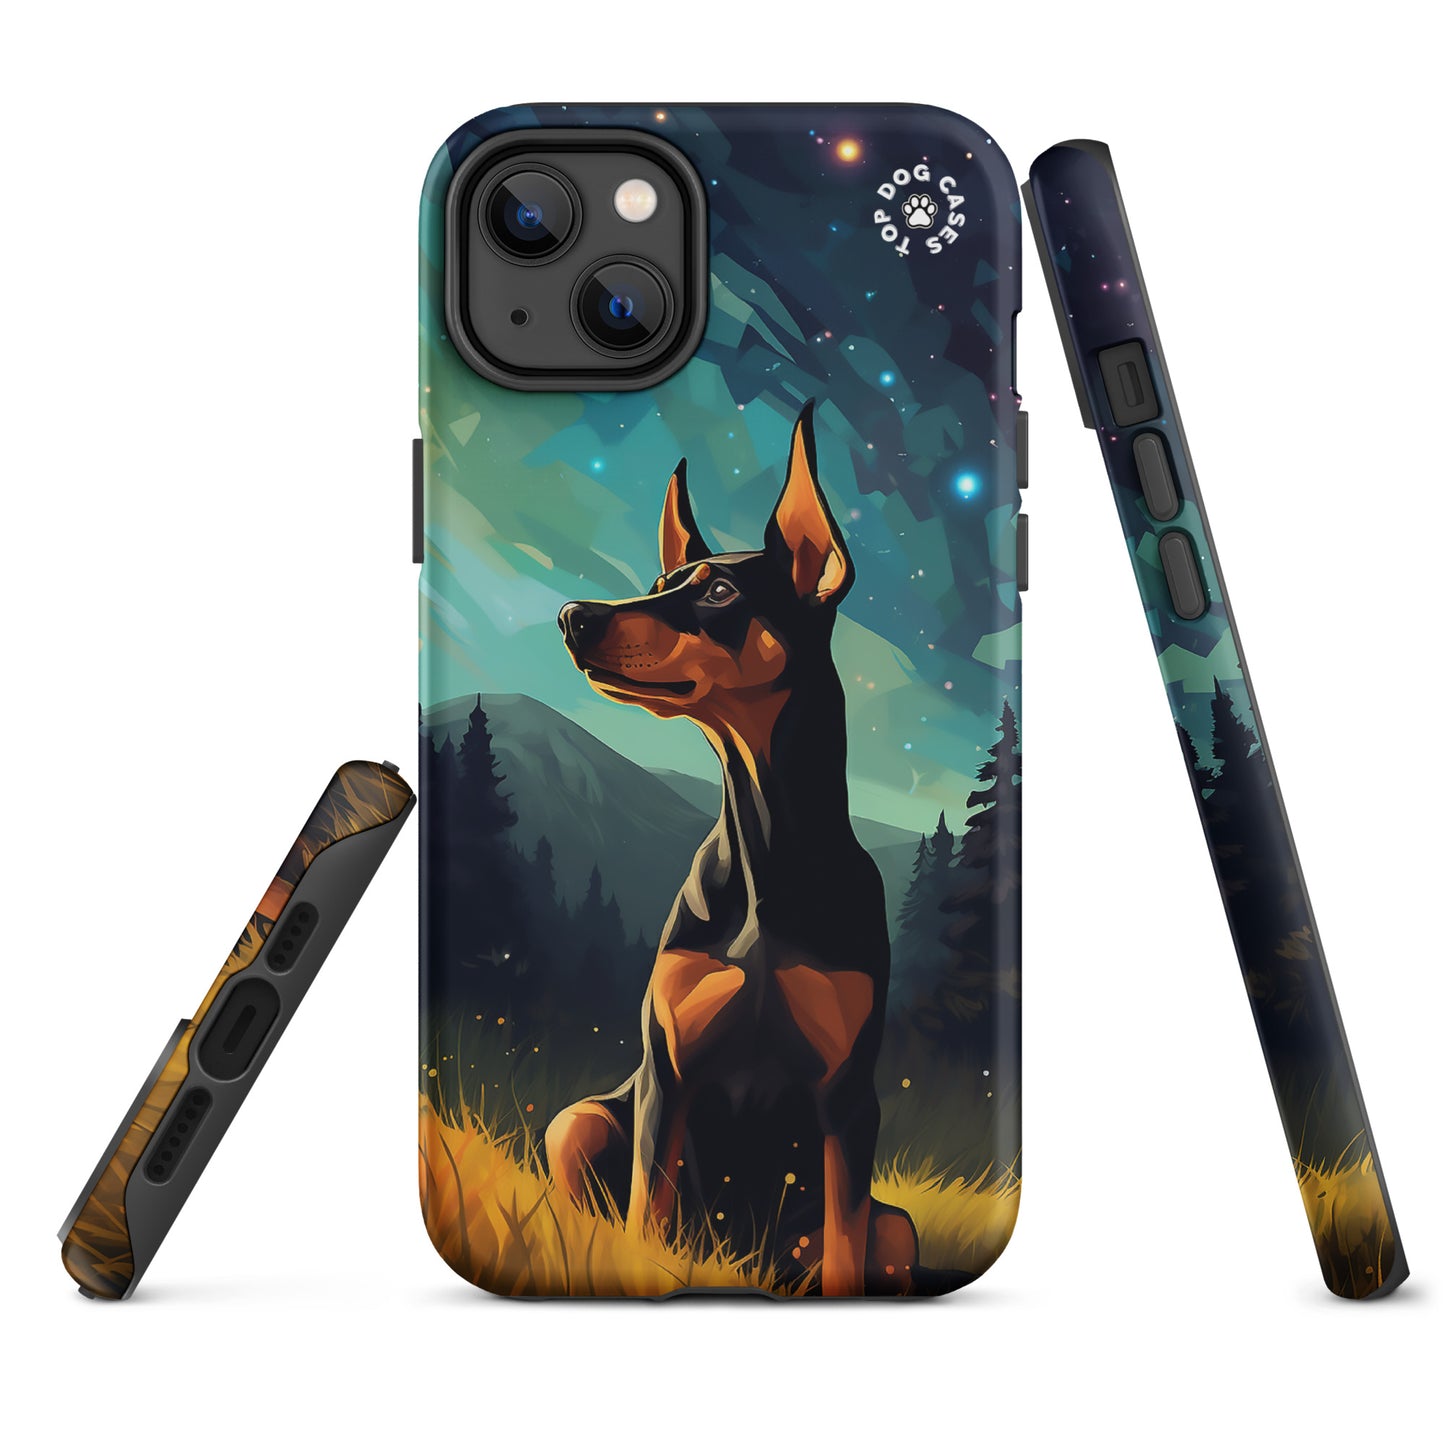 iPhone 14 Case with Doberman - Top Dog Cases - #CuteDog, #CuteDogs, #Doberman, #DogPhoneCase, #dogs, #iPhone14, #iPhone14case, #iPhone14DogCase, #iPhone14Plus, #iPhone14Pluscase, #iPhone14Pro, #iPhone14ProMax, #iPhone14ProMaxCase